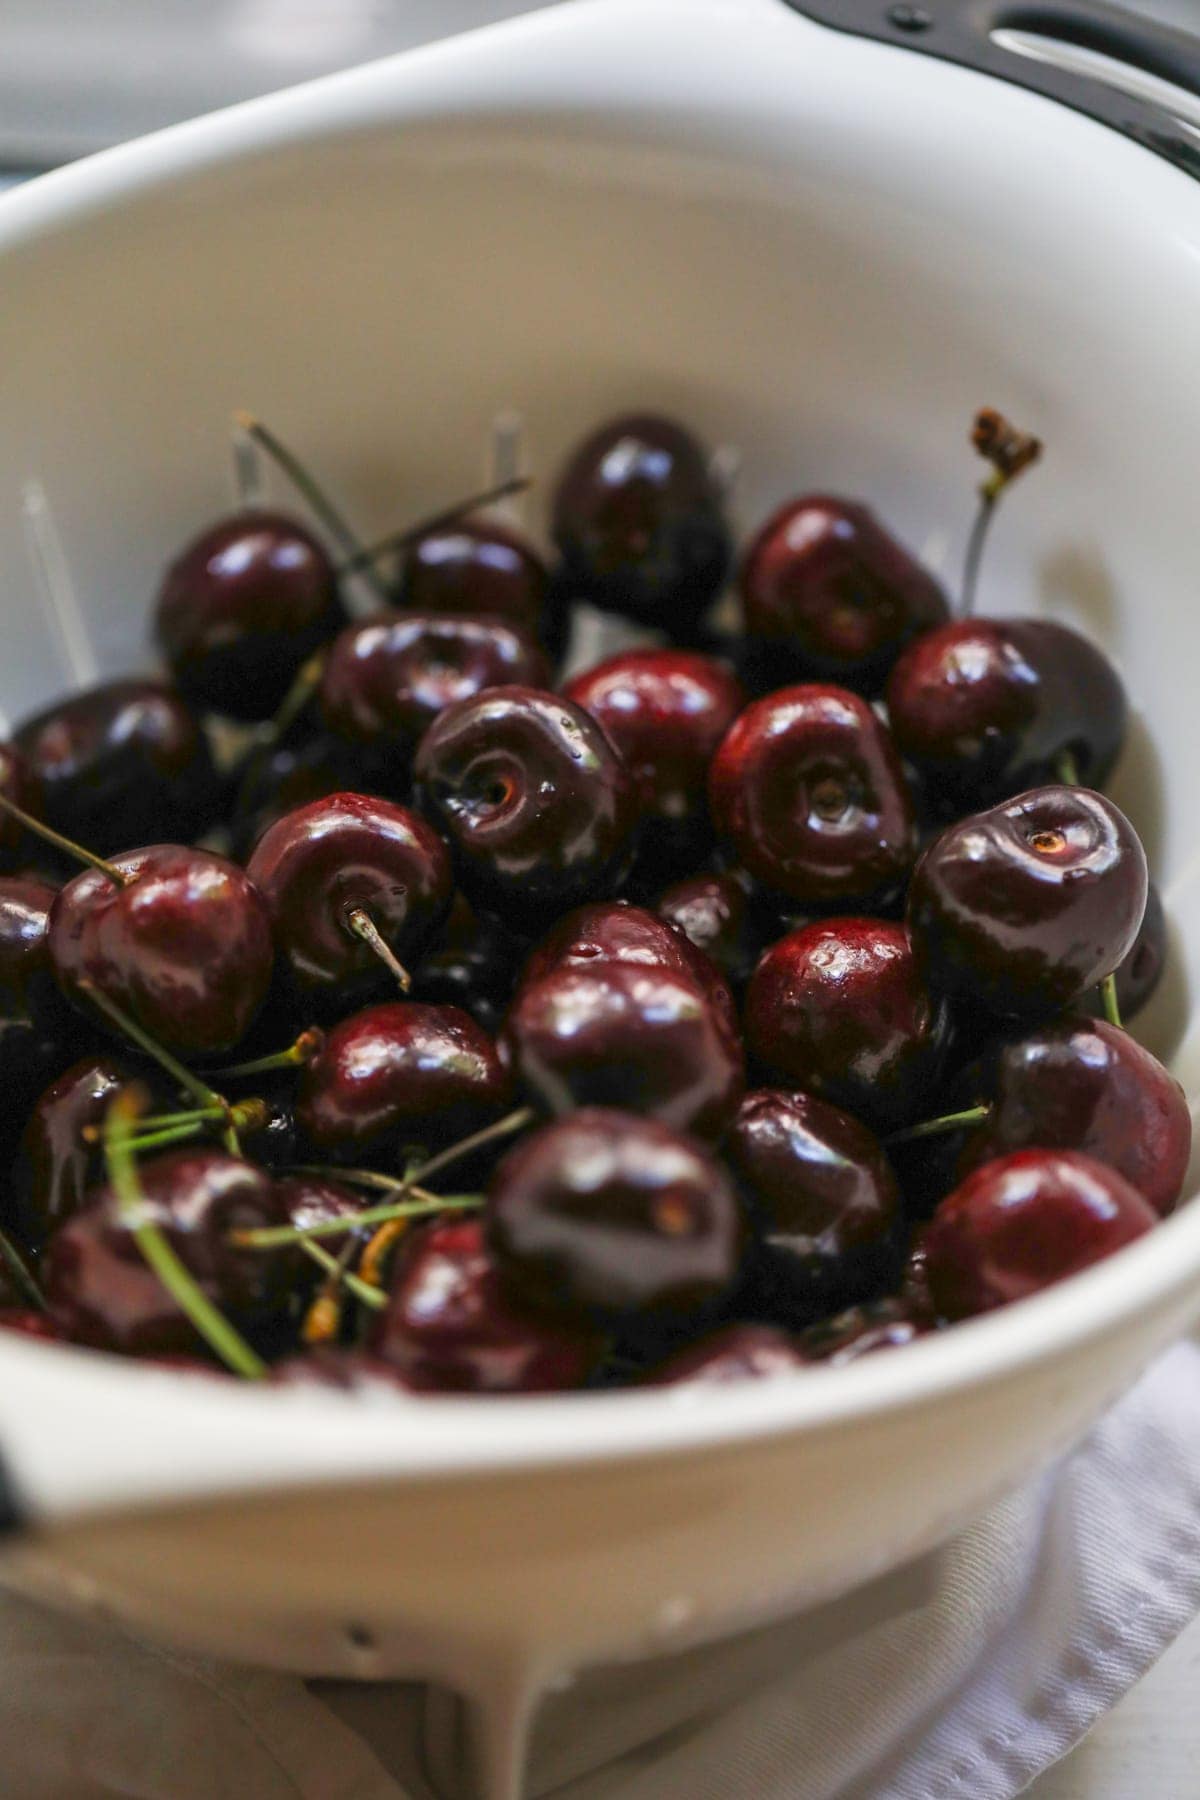 A close up of a bowl of cherries